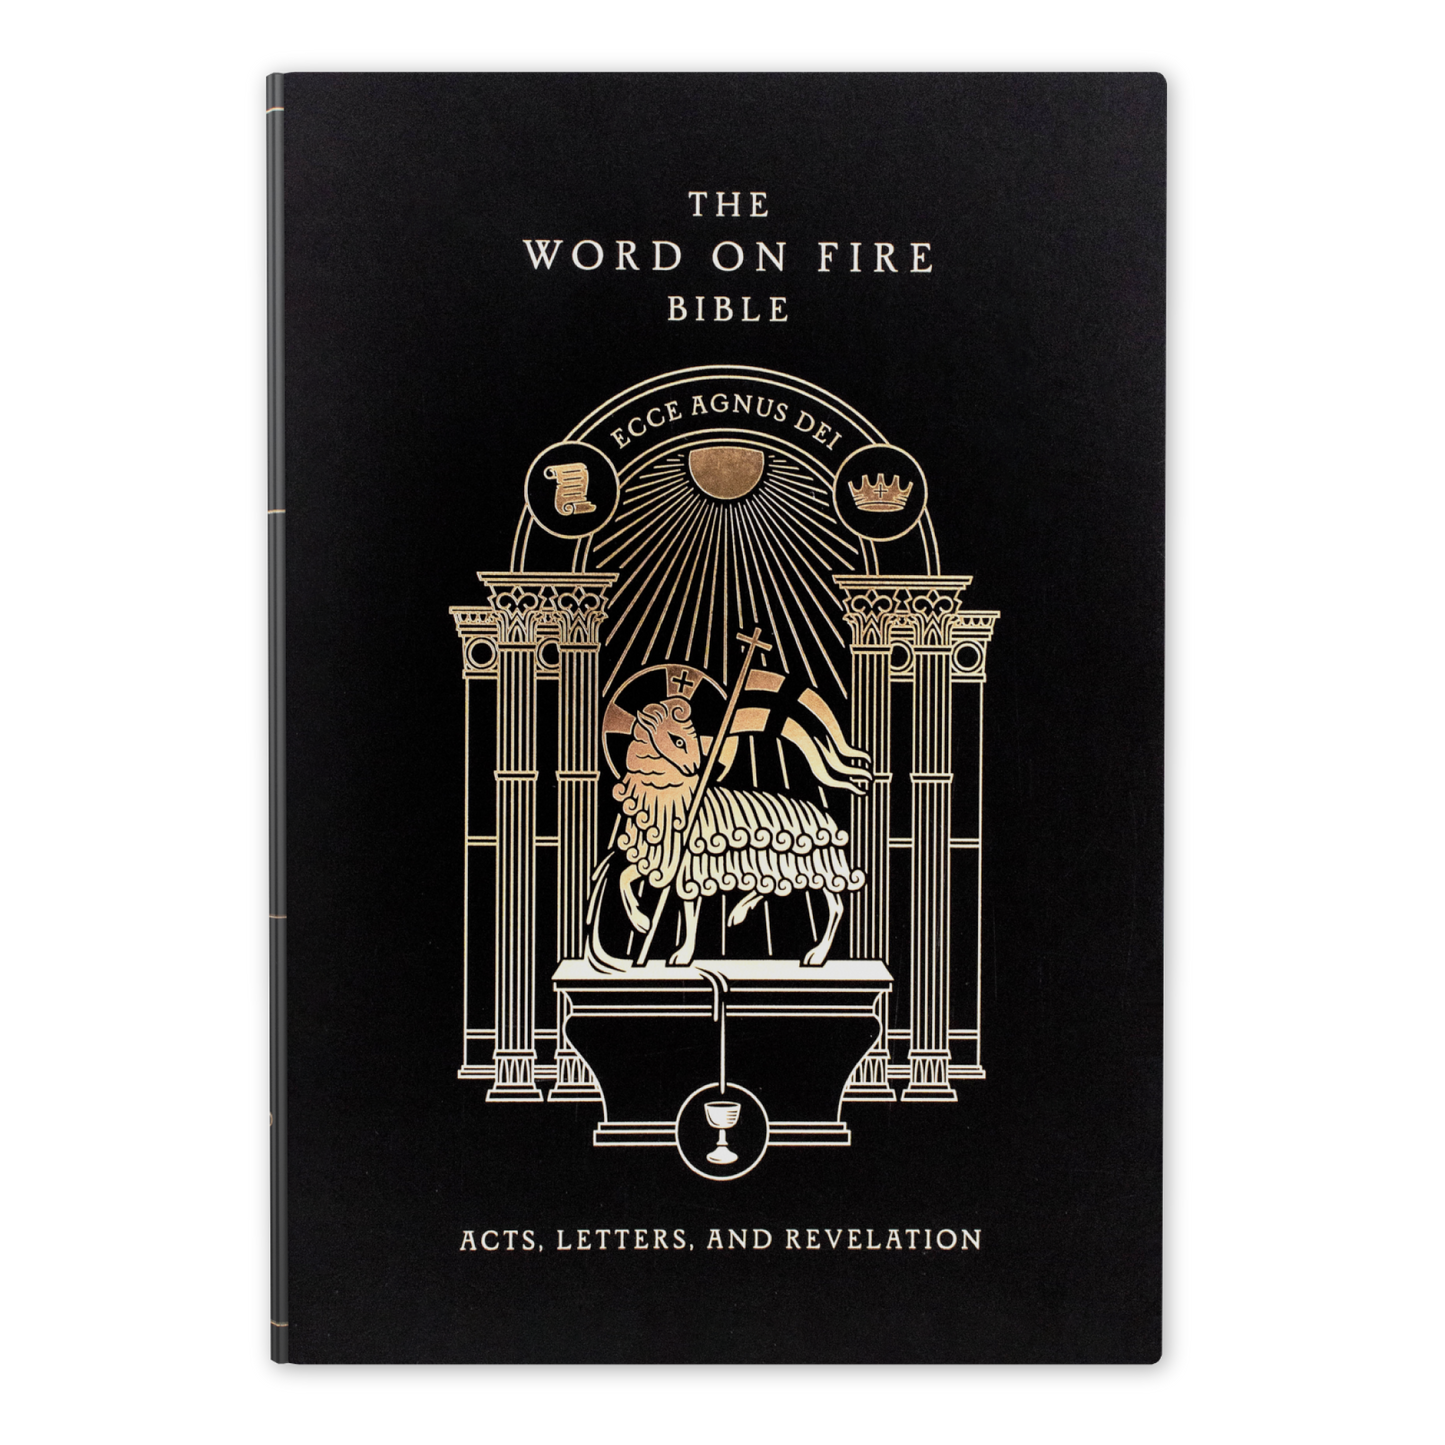 The Word on Fire Bible (Volume II): Acts, Letters and Revelation